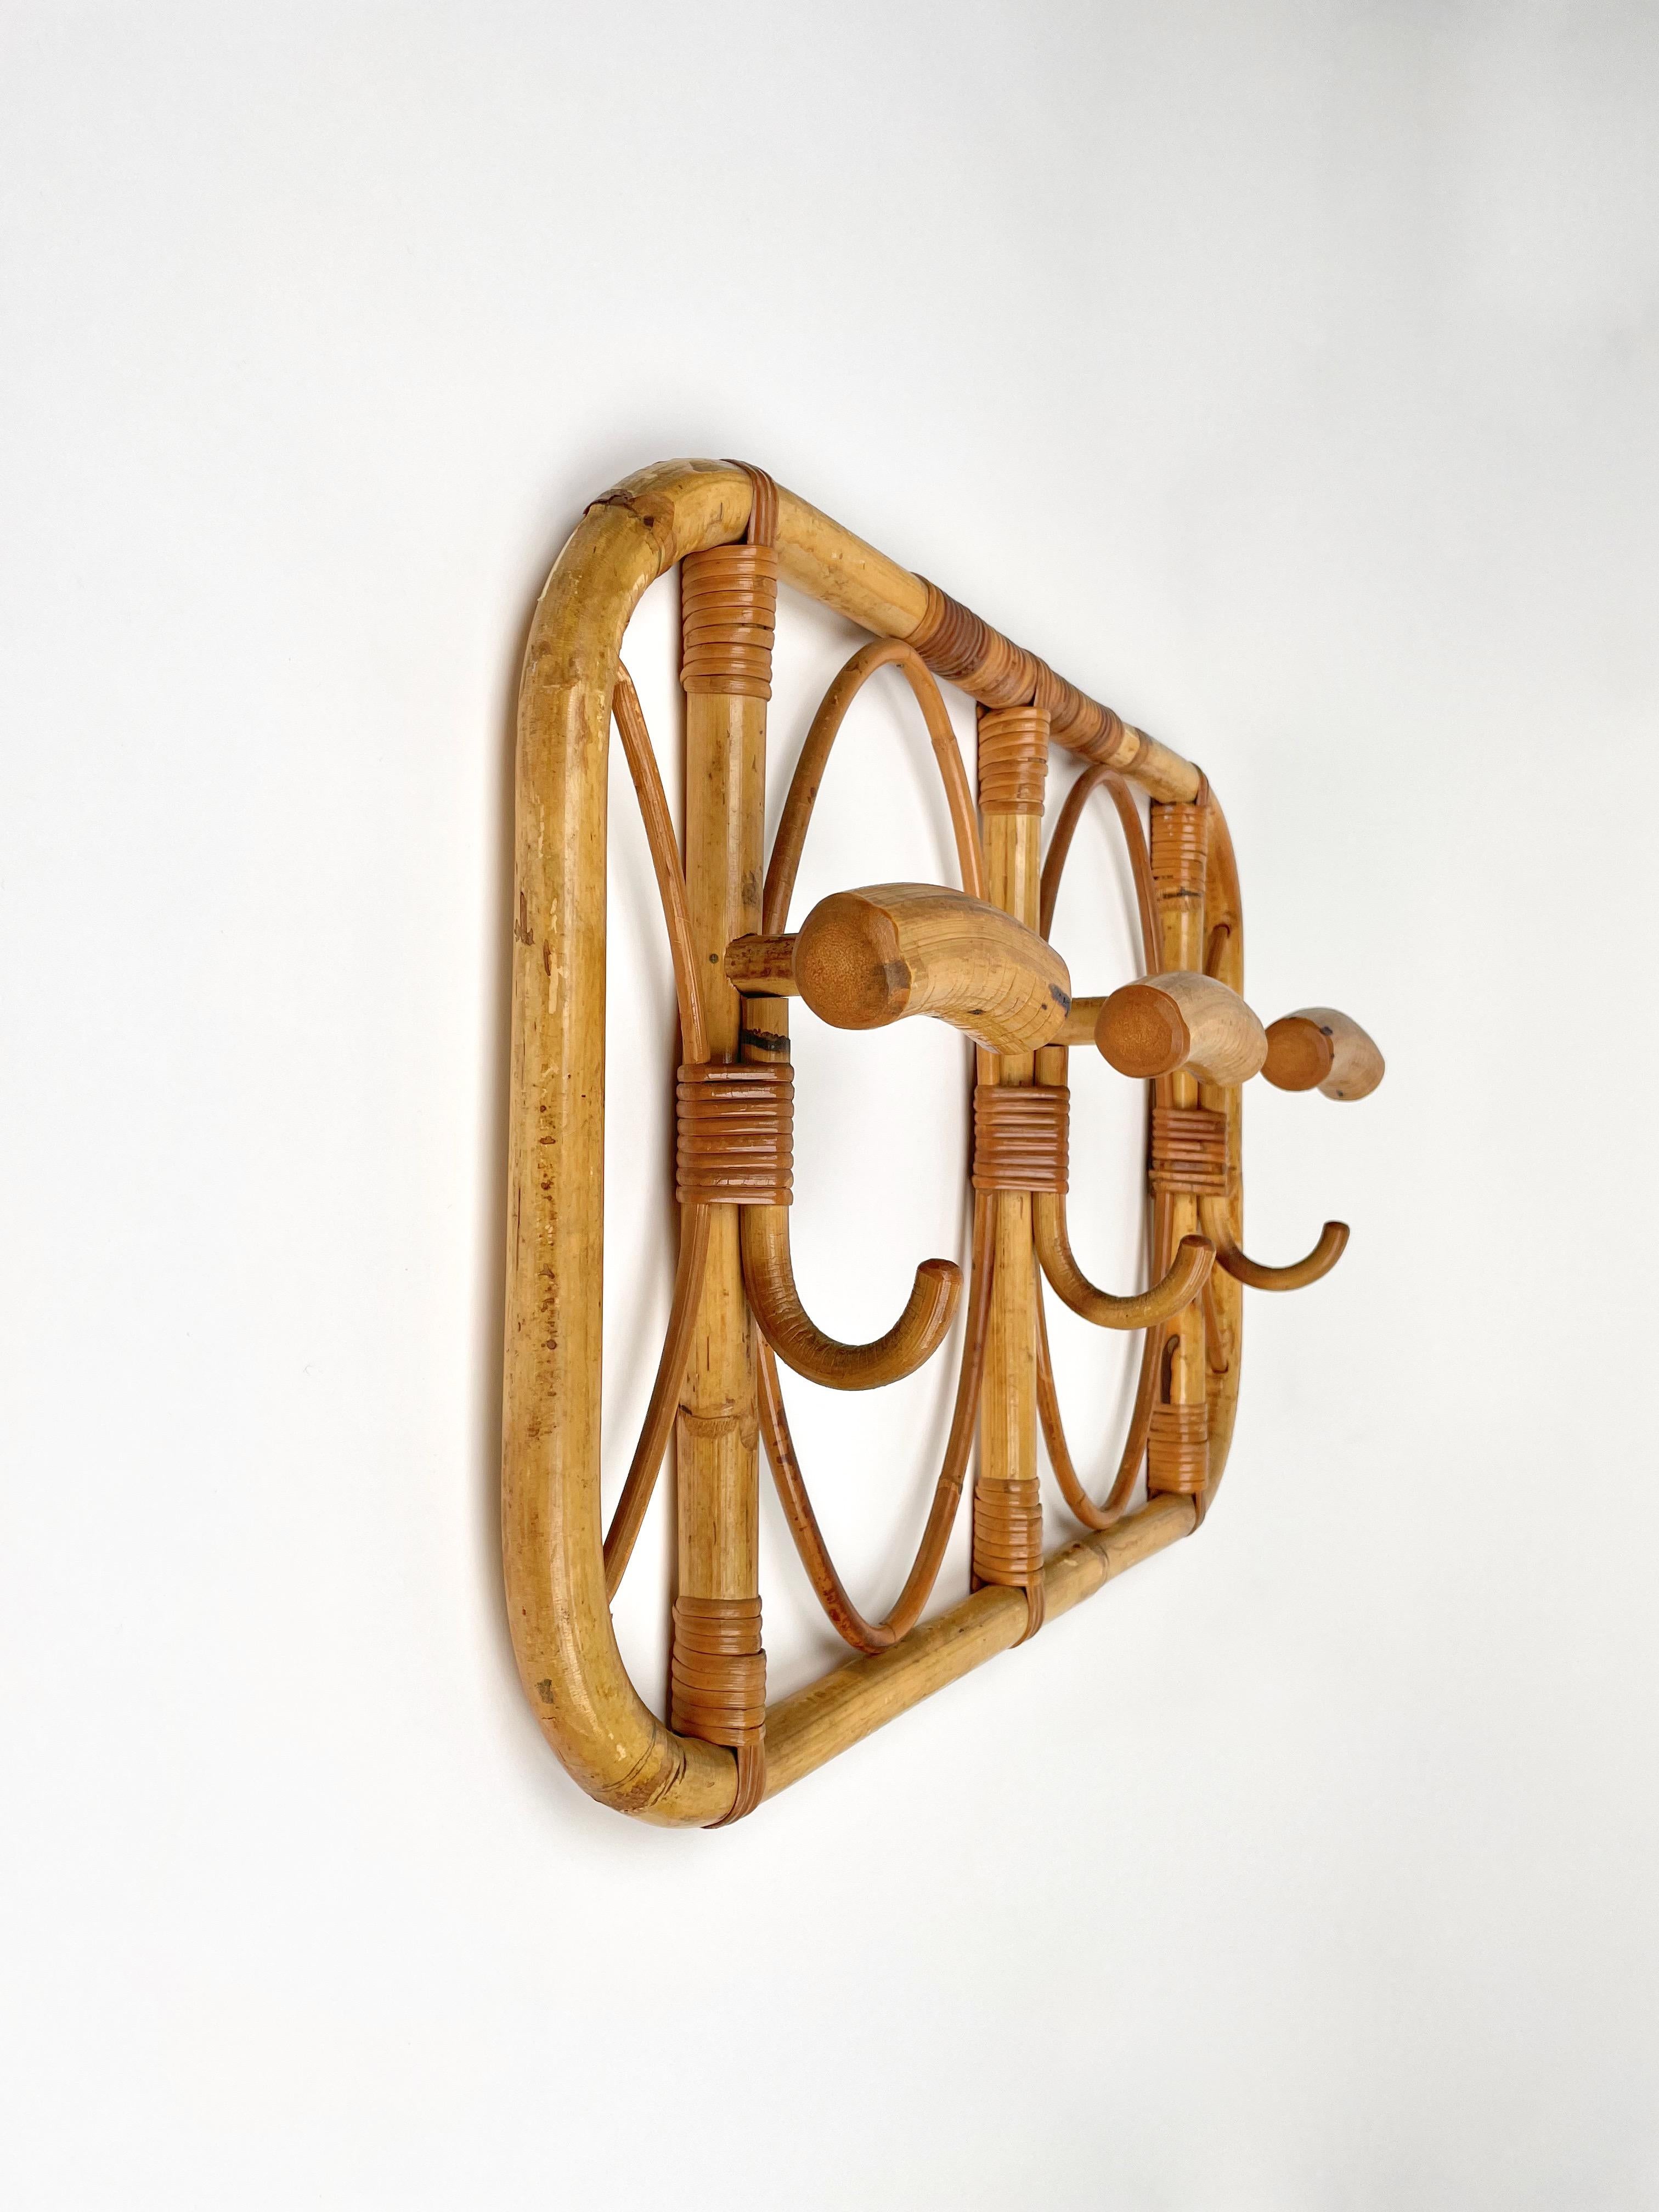 Midcentury Bamboo and Rattan Coat Rack, Italy 1960s For Sale 3